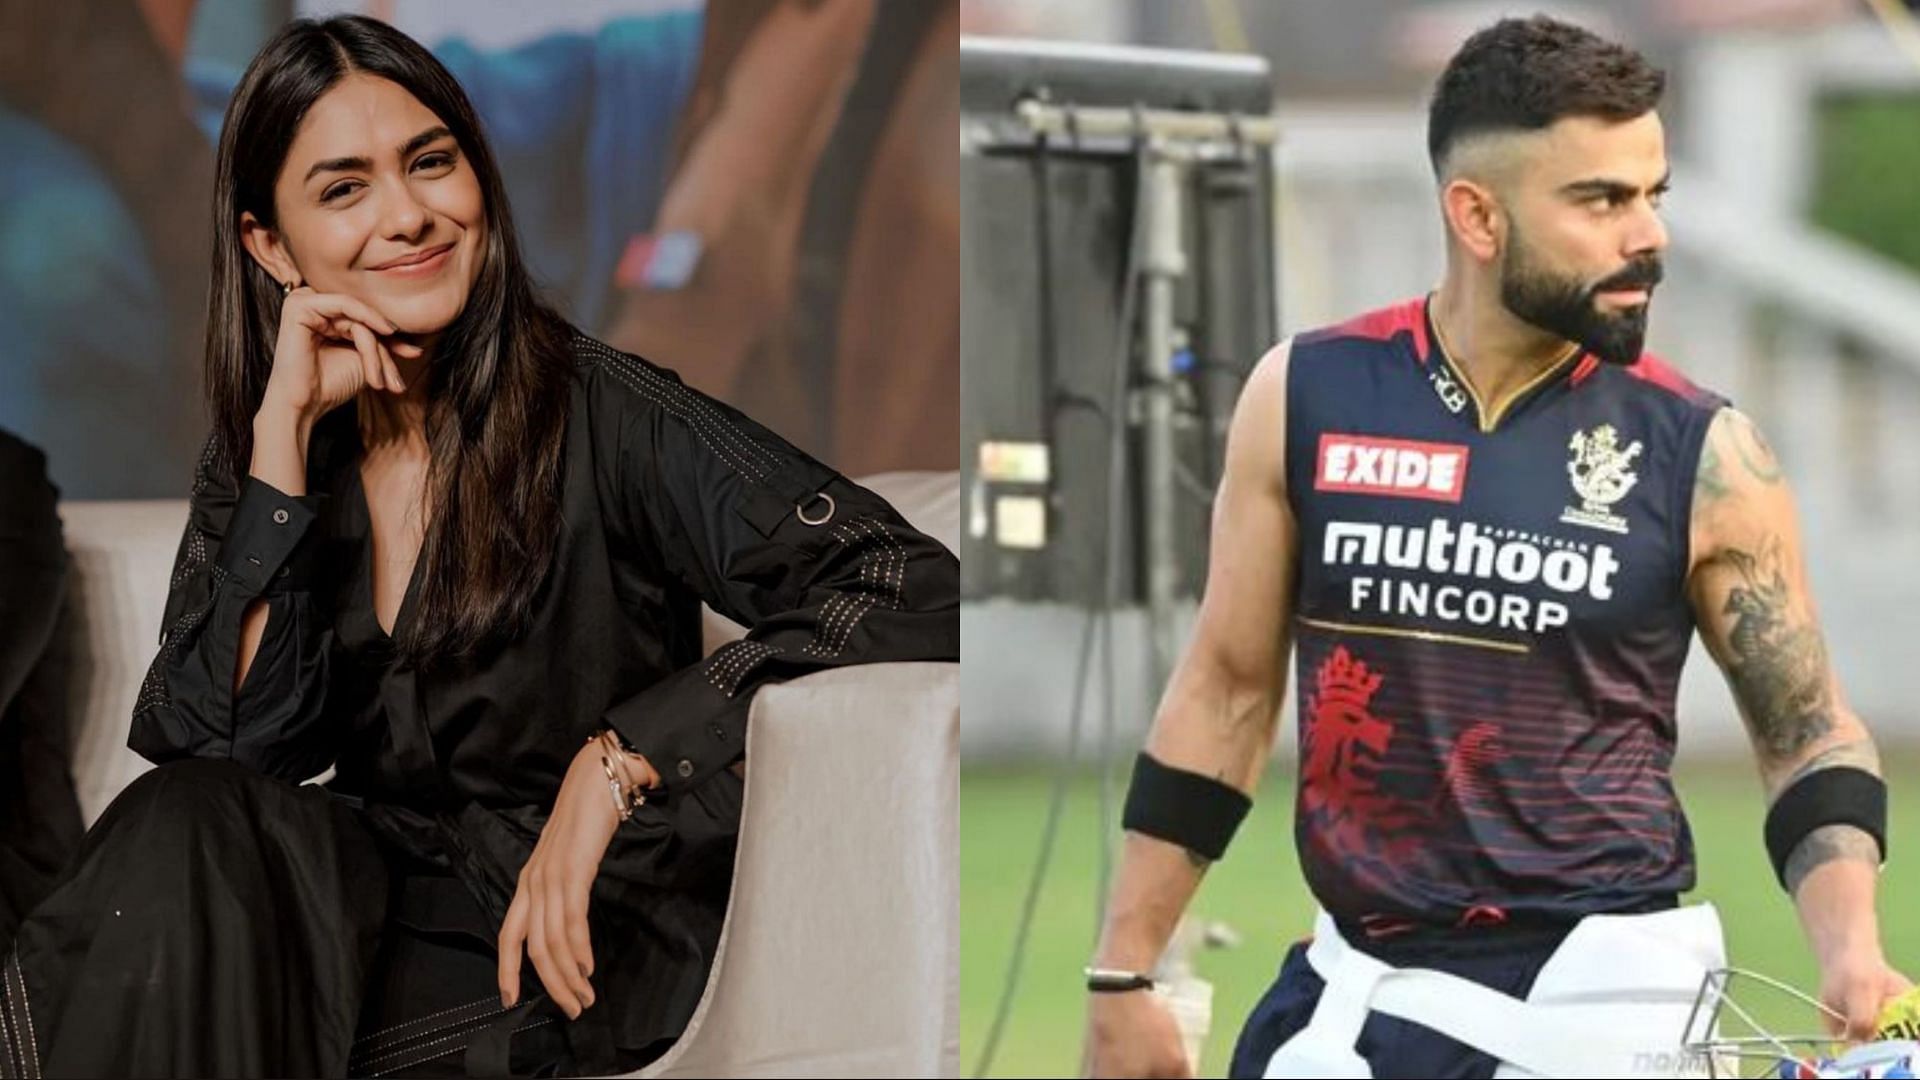 Mrunal Thakur once revealed that she was in love with Virat Kohli (Image Source: Instagram)